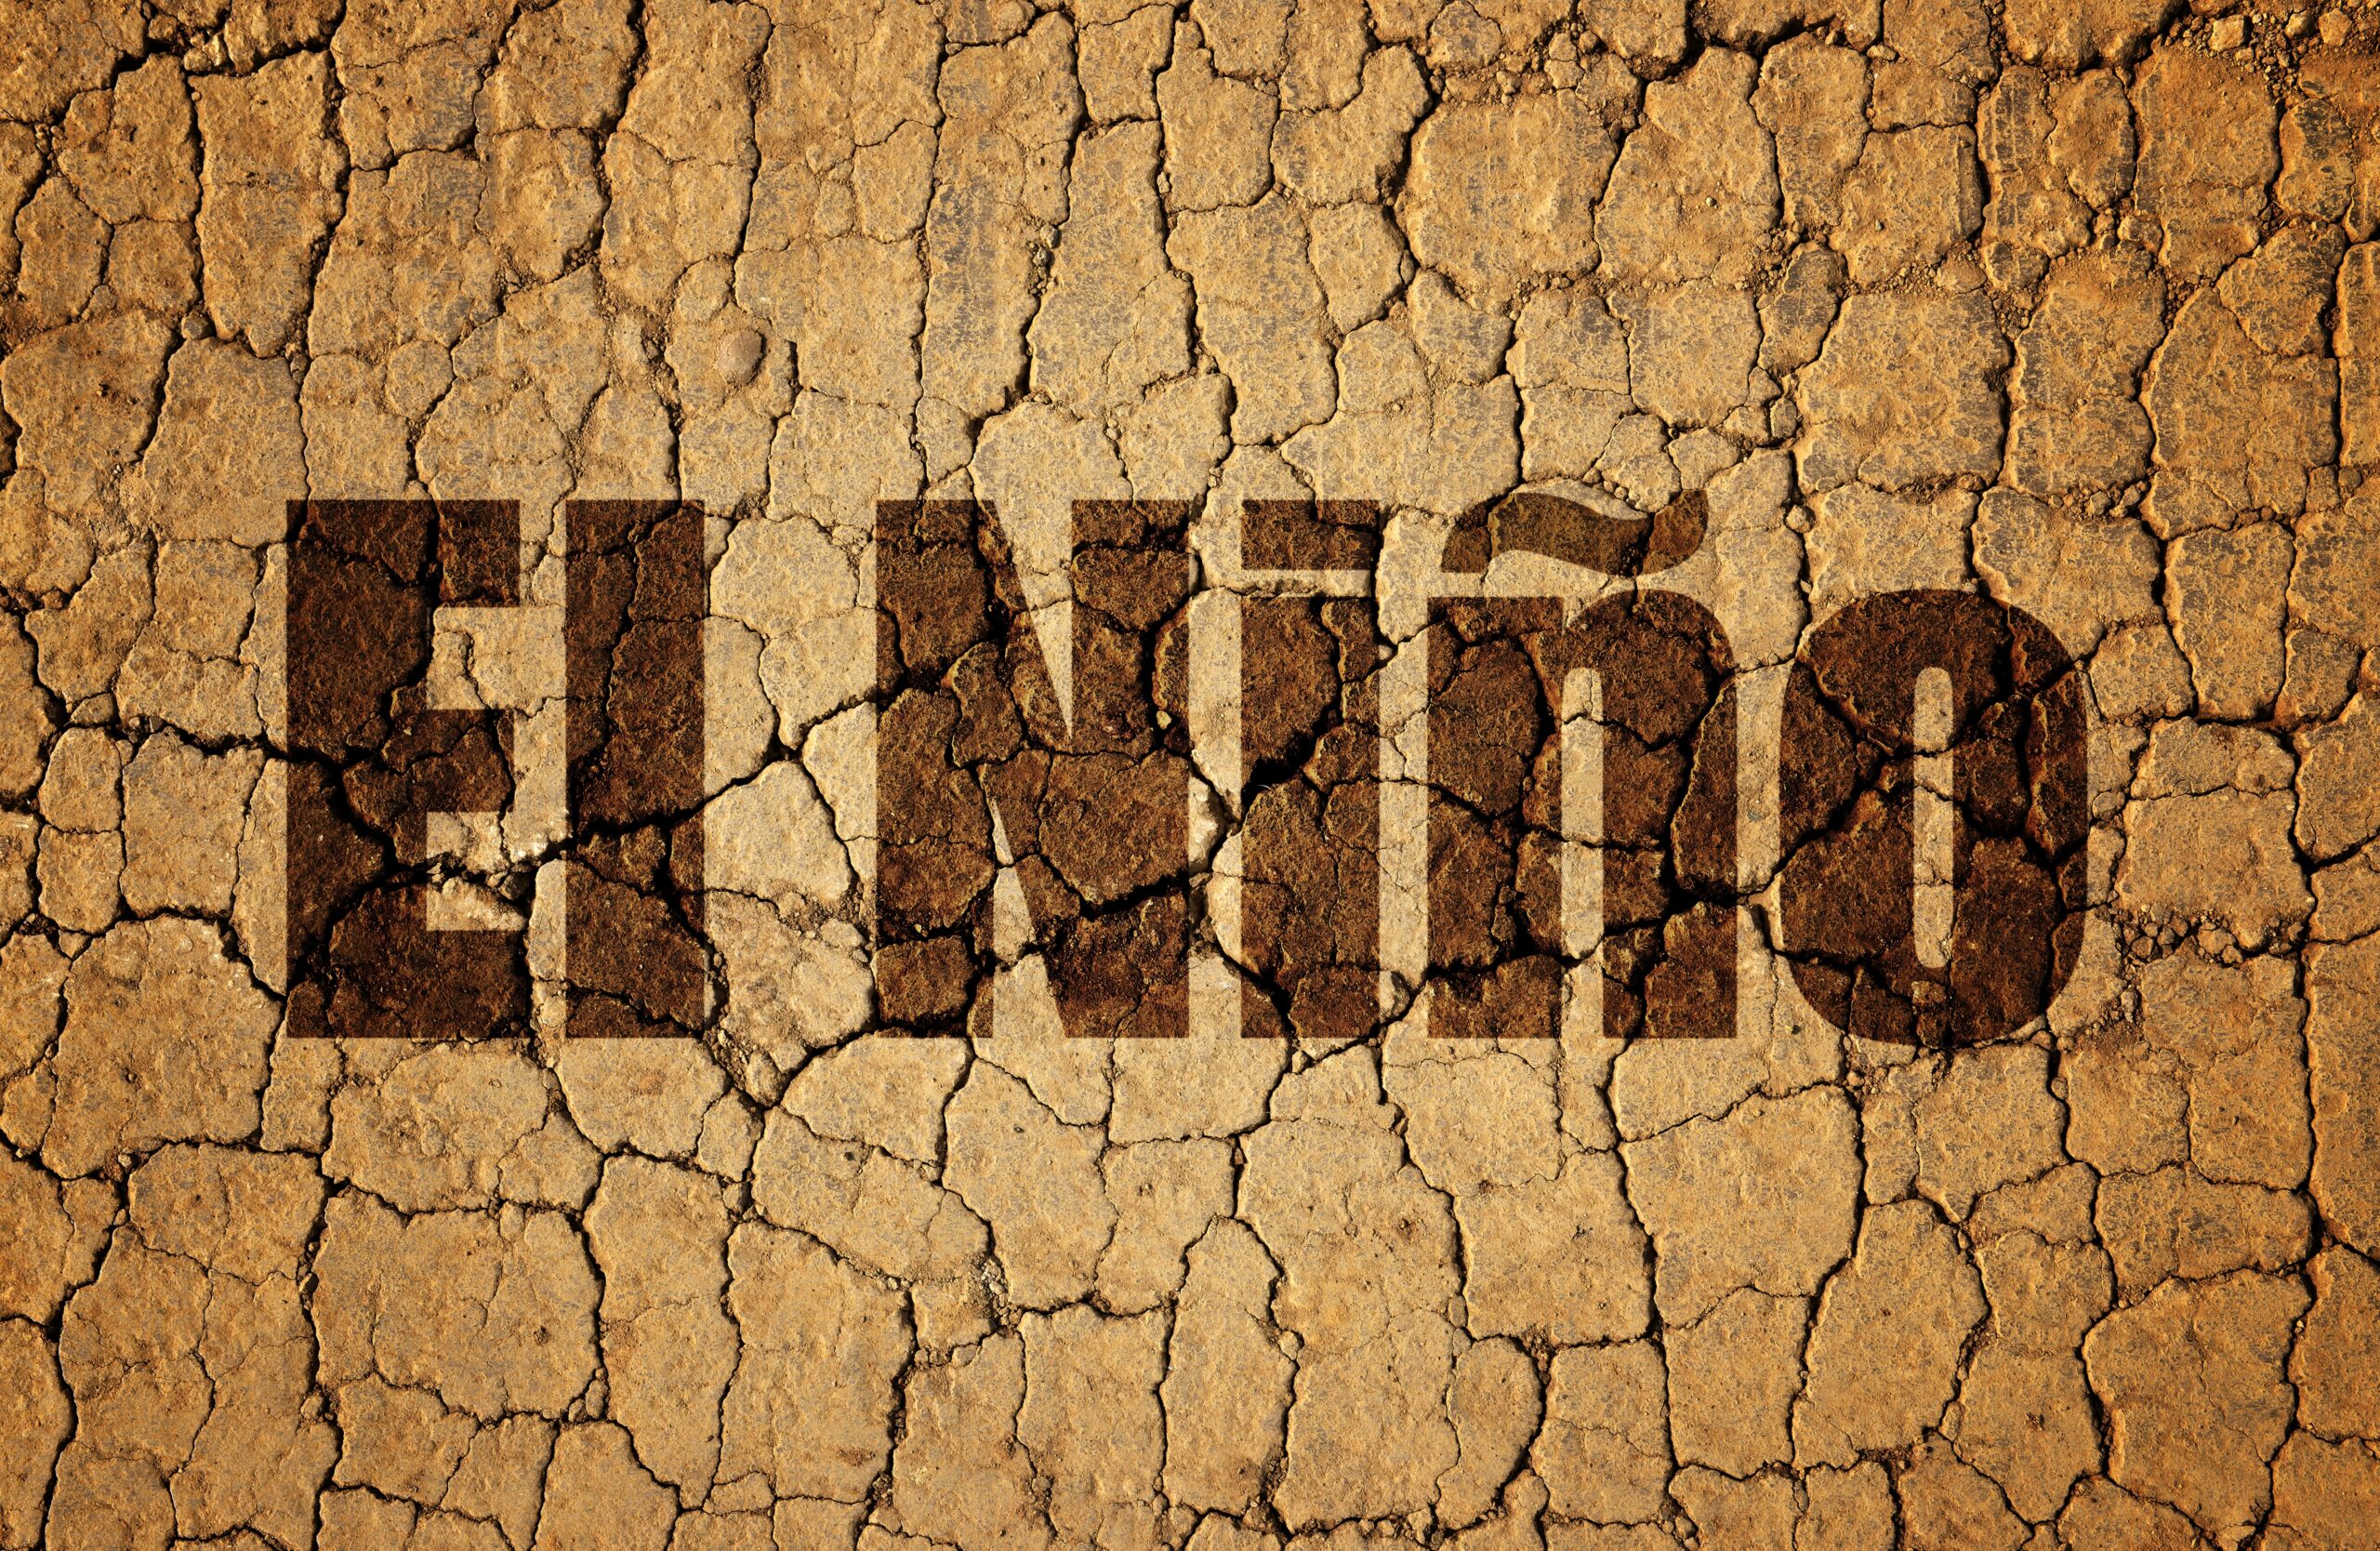 Cracked earth texture with the word 'El Niño' superimposed, indicating drought conditions associated with the weather phenomenon.